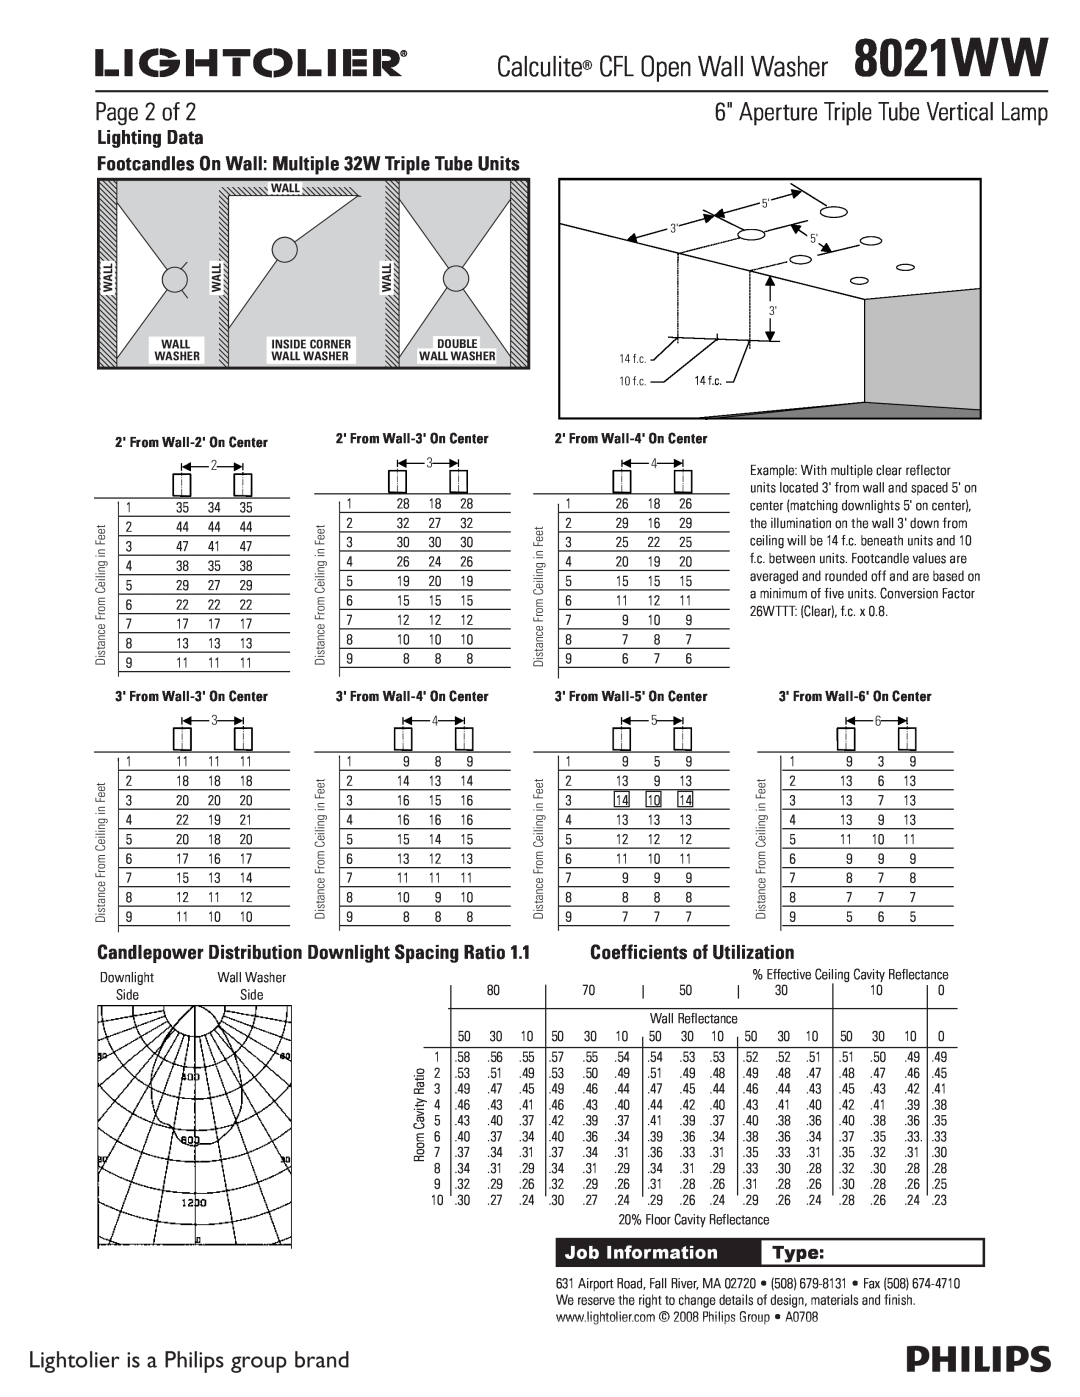 Lightolier 8021WW Page 2 of, Lighting Data, Candlepower Distribution Downlight Spacing Ratio, Coefficients of Utilization 